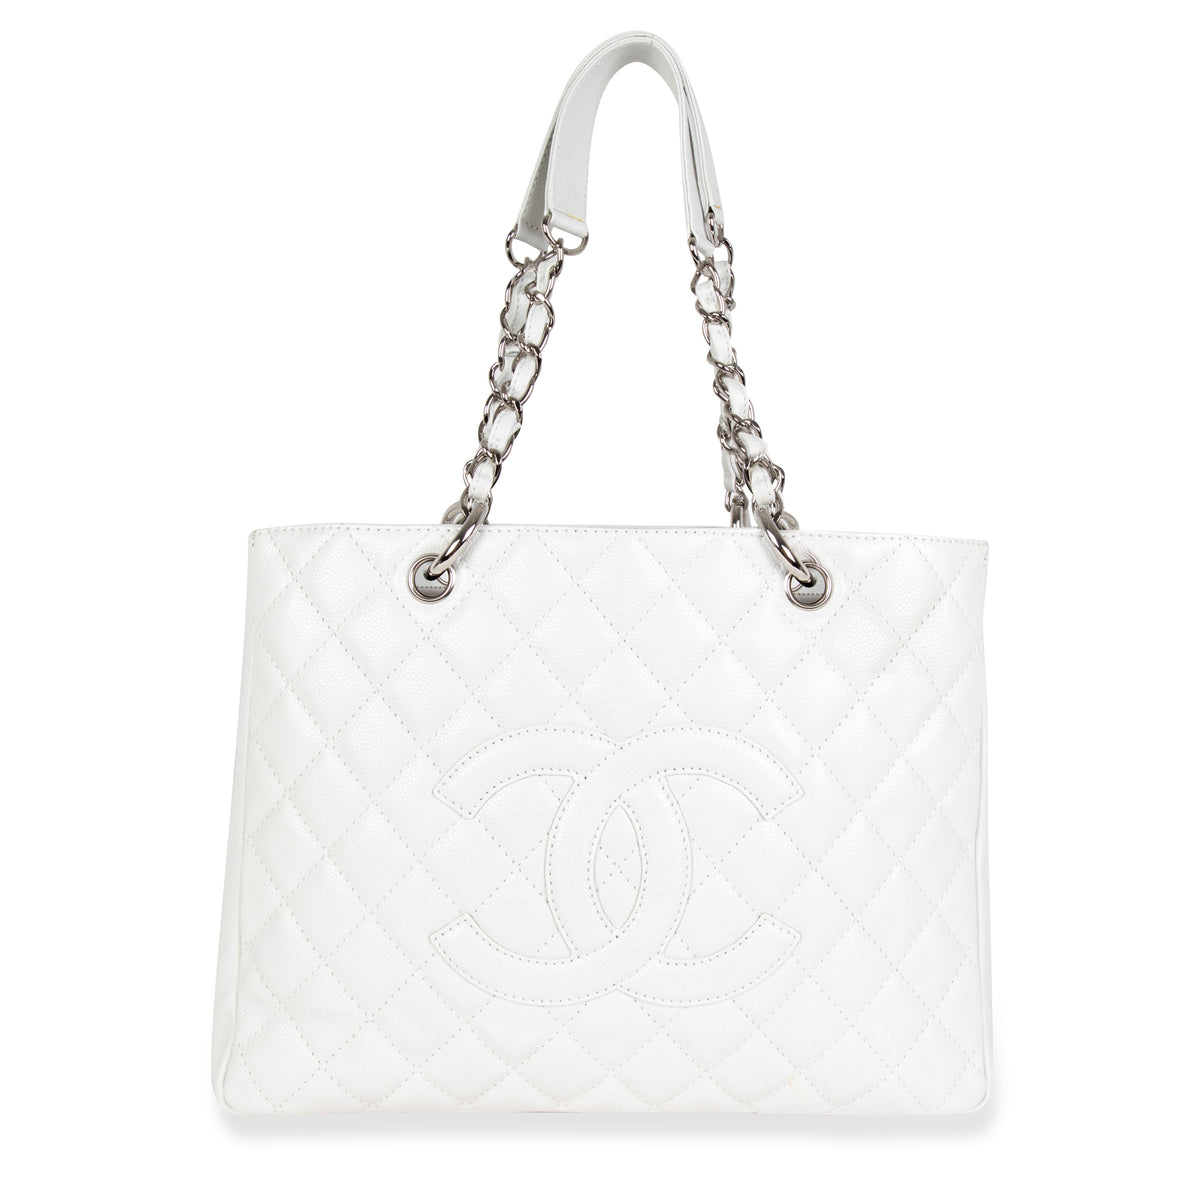 Authentic Chanel White Caviar Leather Quilted Grand Shopper Tote GST Bag